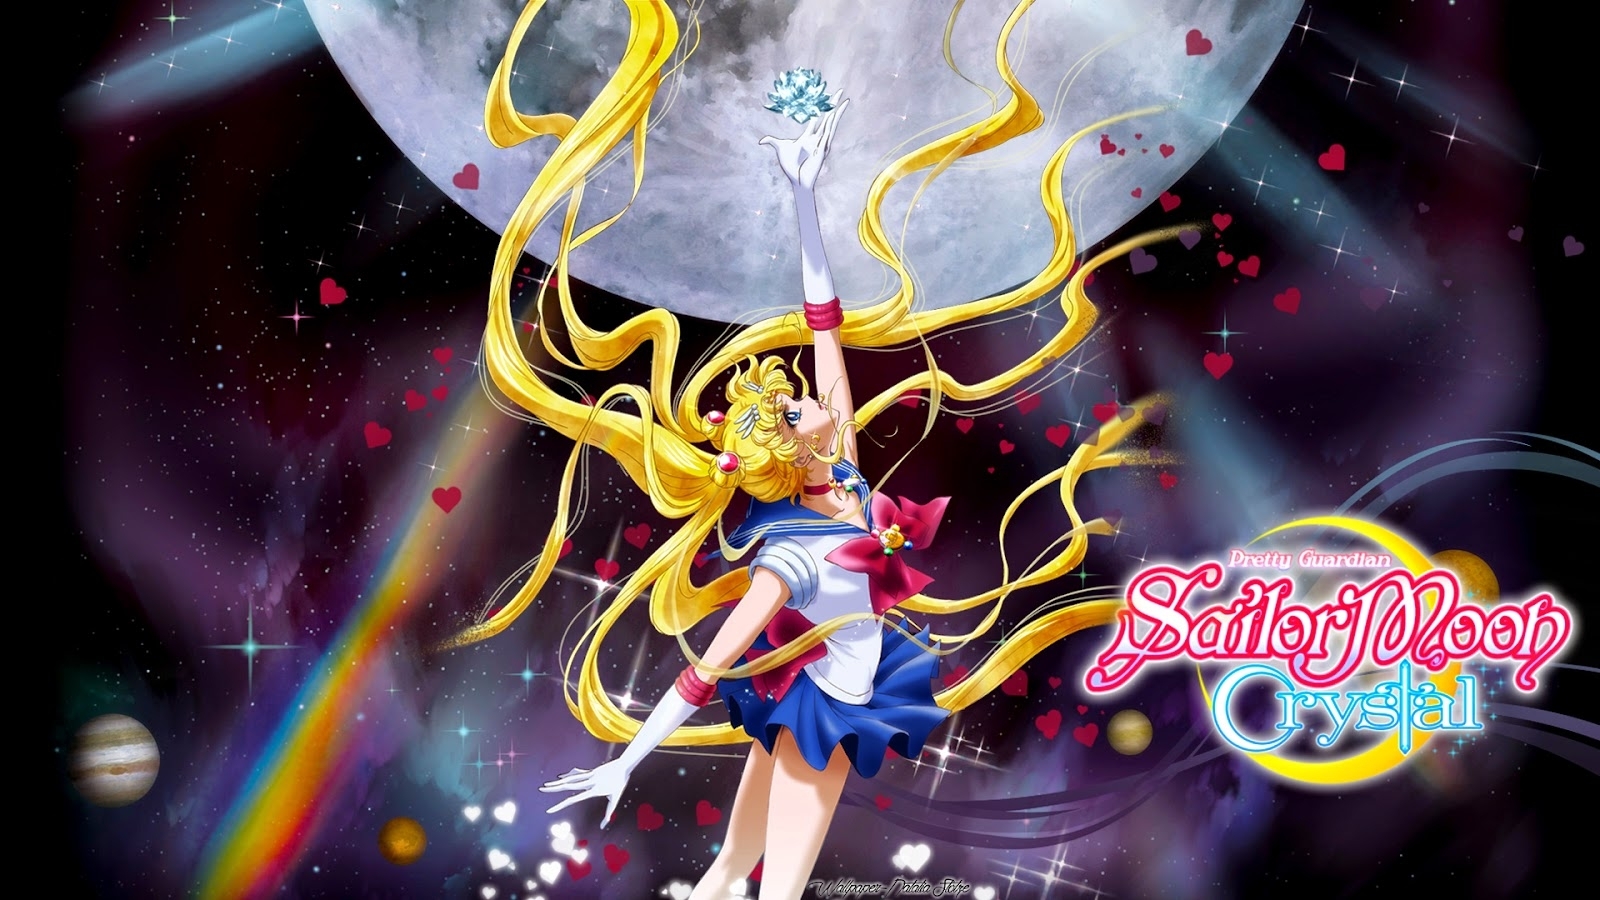 10 Most Popular Sailor Moon Crystal Wallpaper 1920X1080 FULL HD 1080p For PC Background